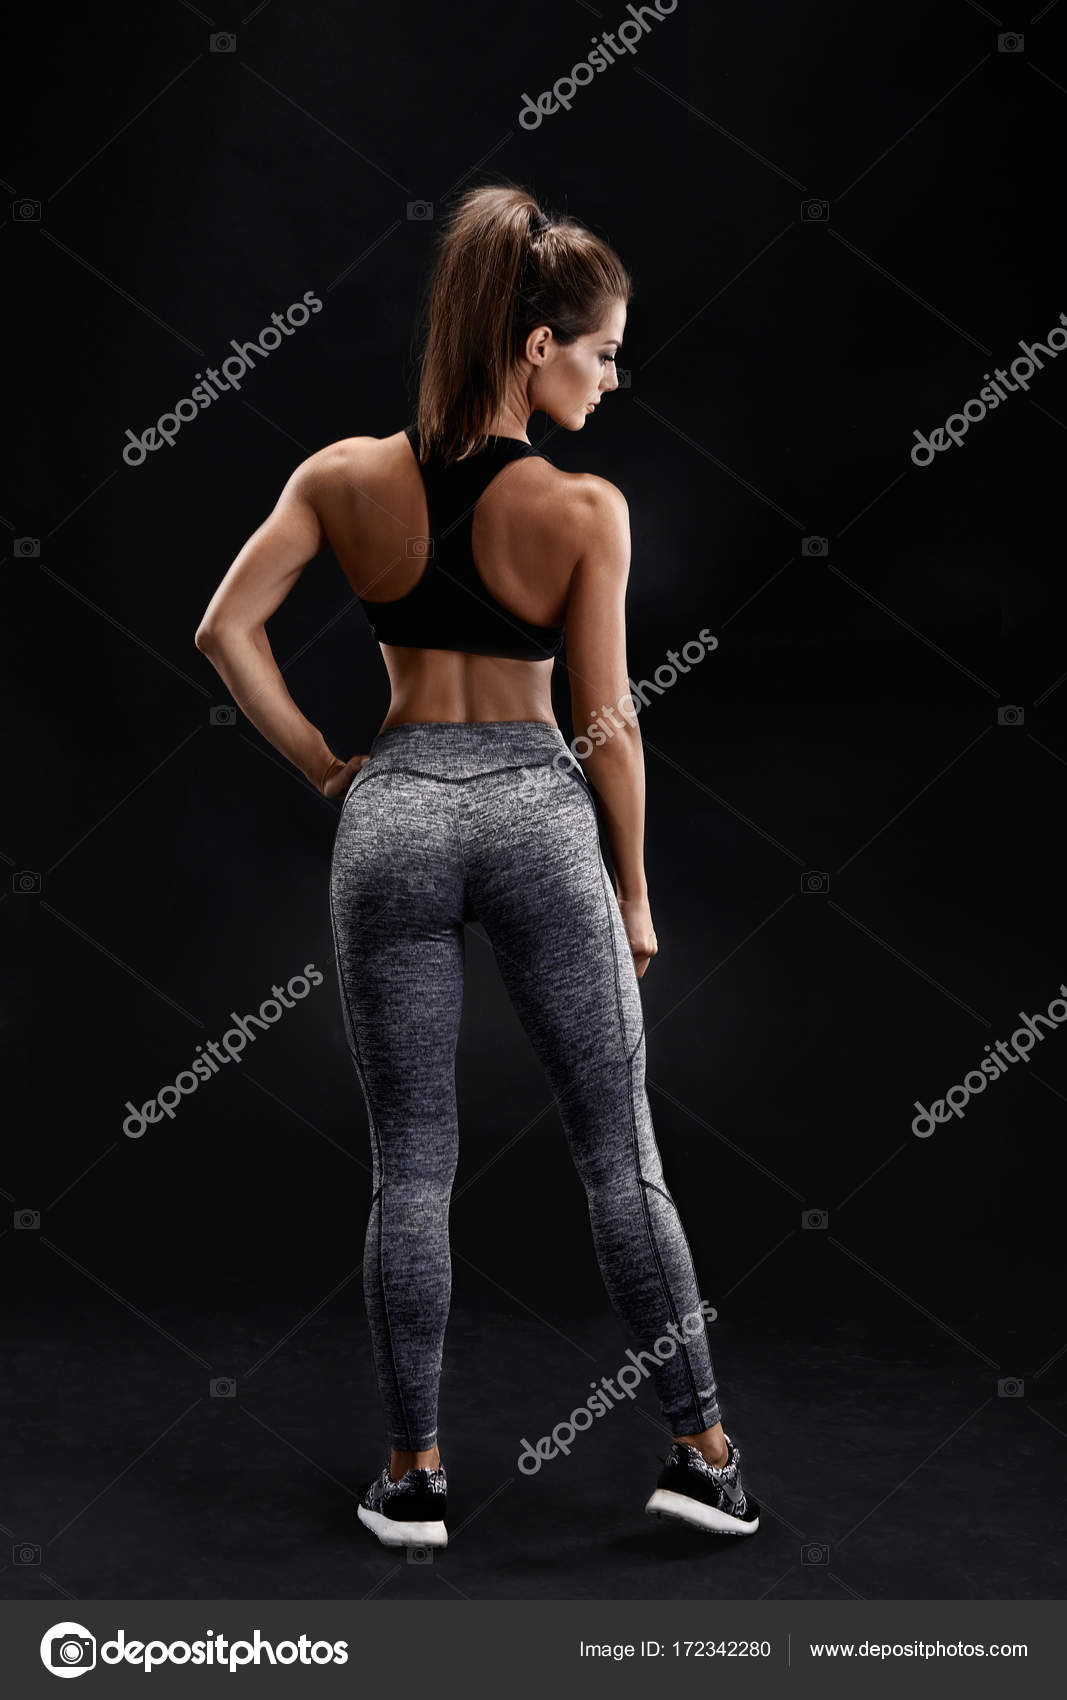 Shot of a strong woman with muscular abdomen in sportswear. Fitness female  model posing on black background. Stock Photo by ©nazarov.dnepr@gmail.com  172342280